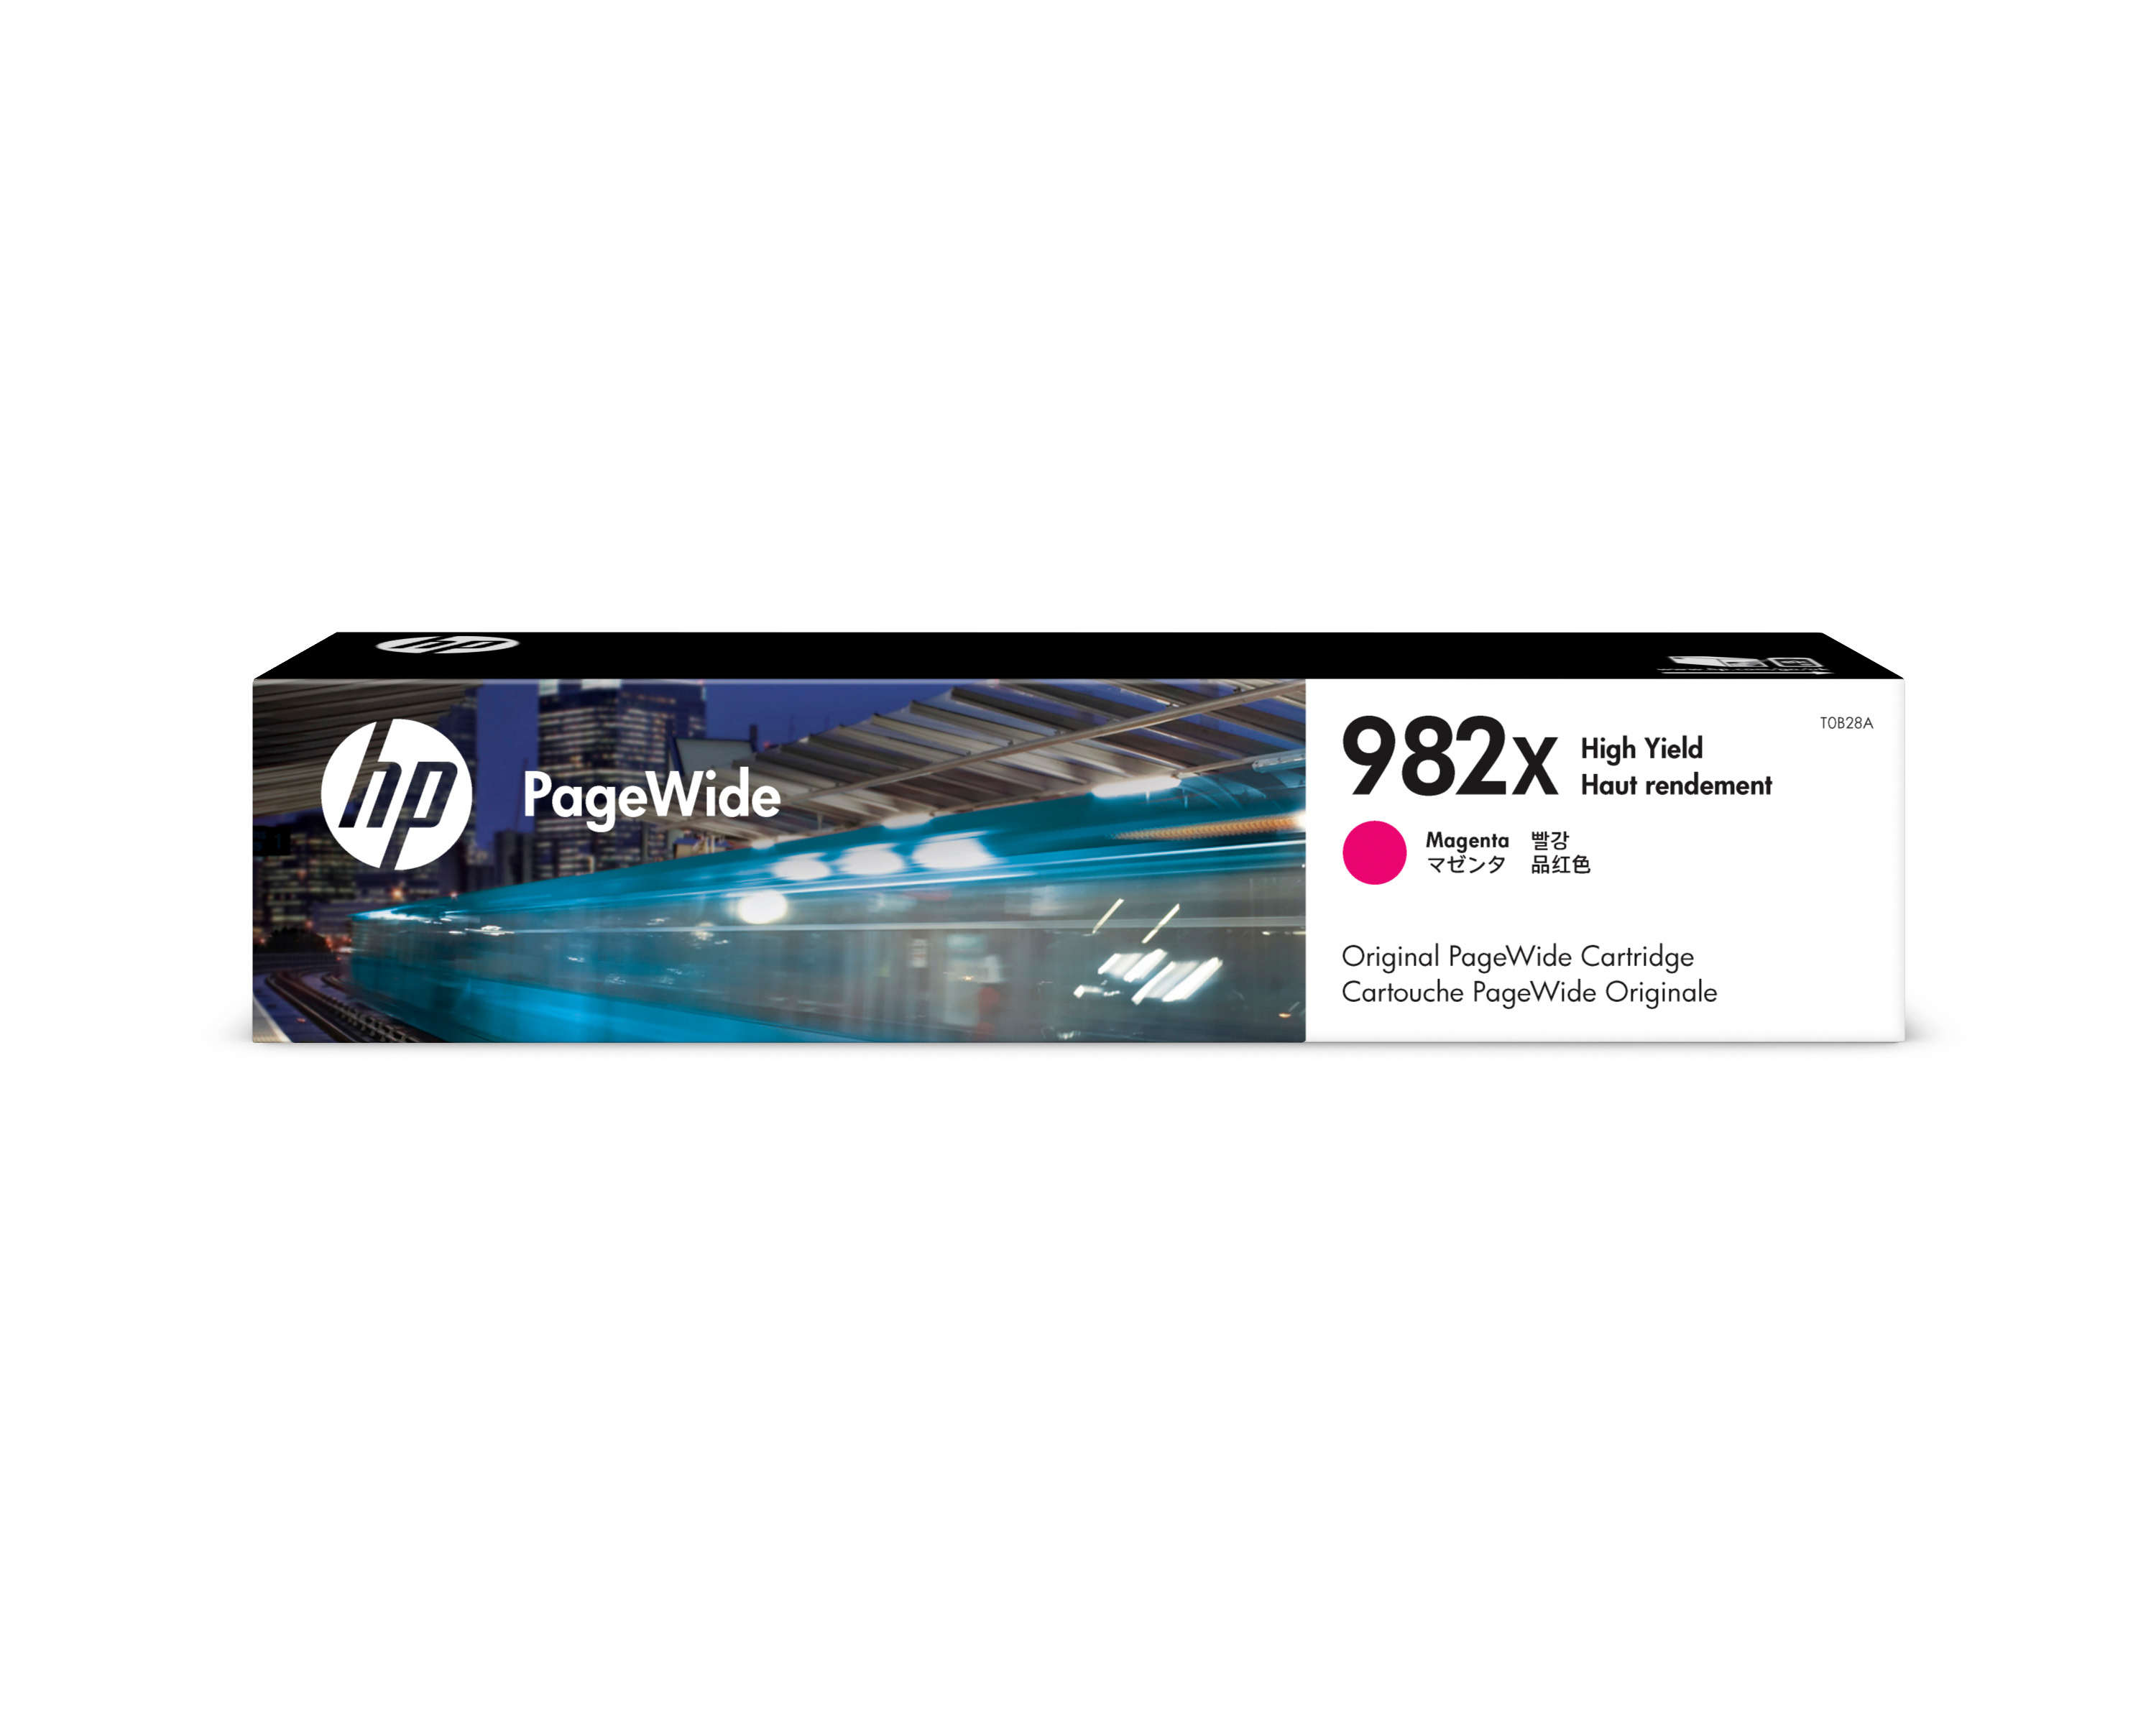 HP PW-Cartridge 982X magenta T0B28A PageWide Ent.765 16'000 p.